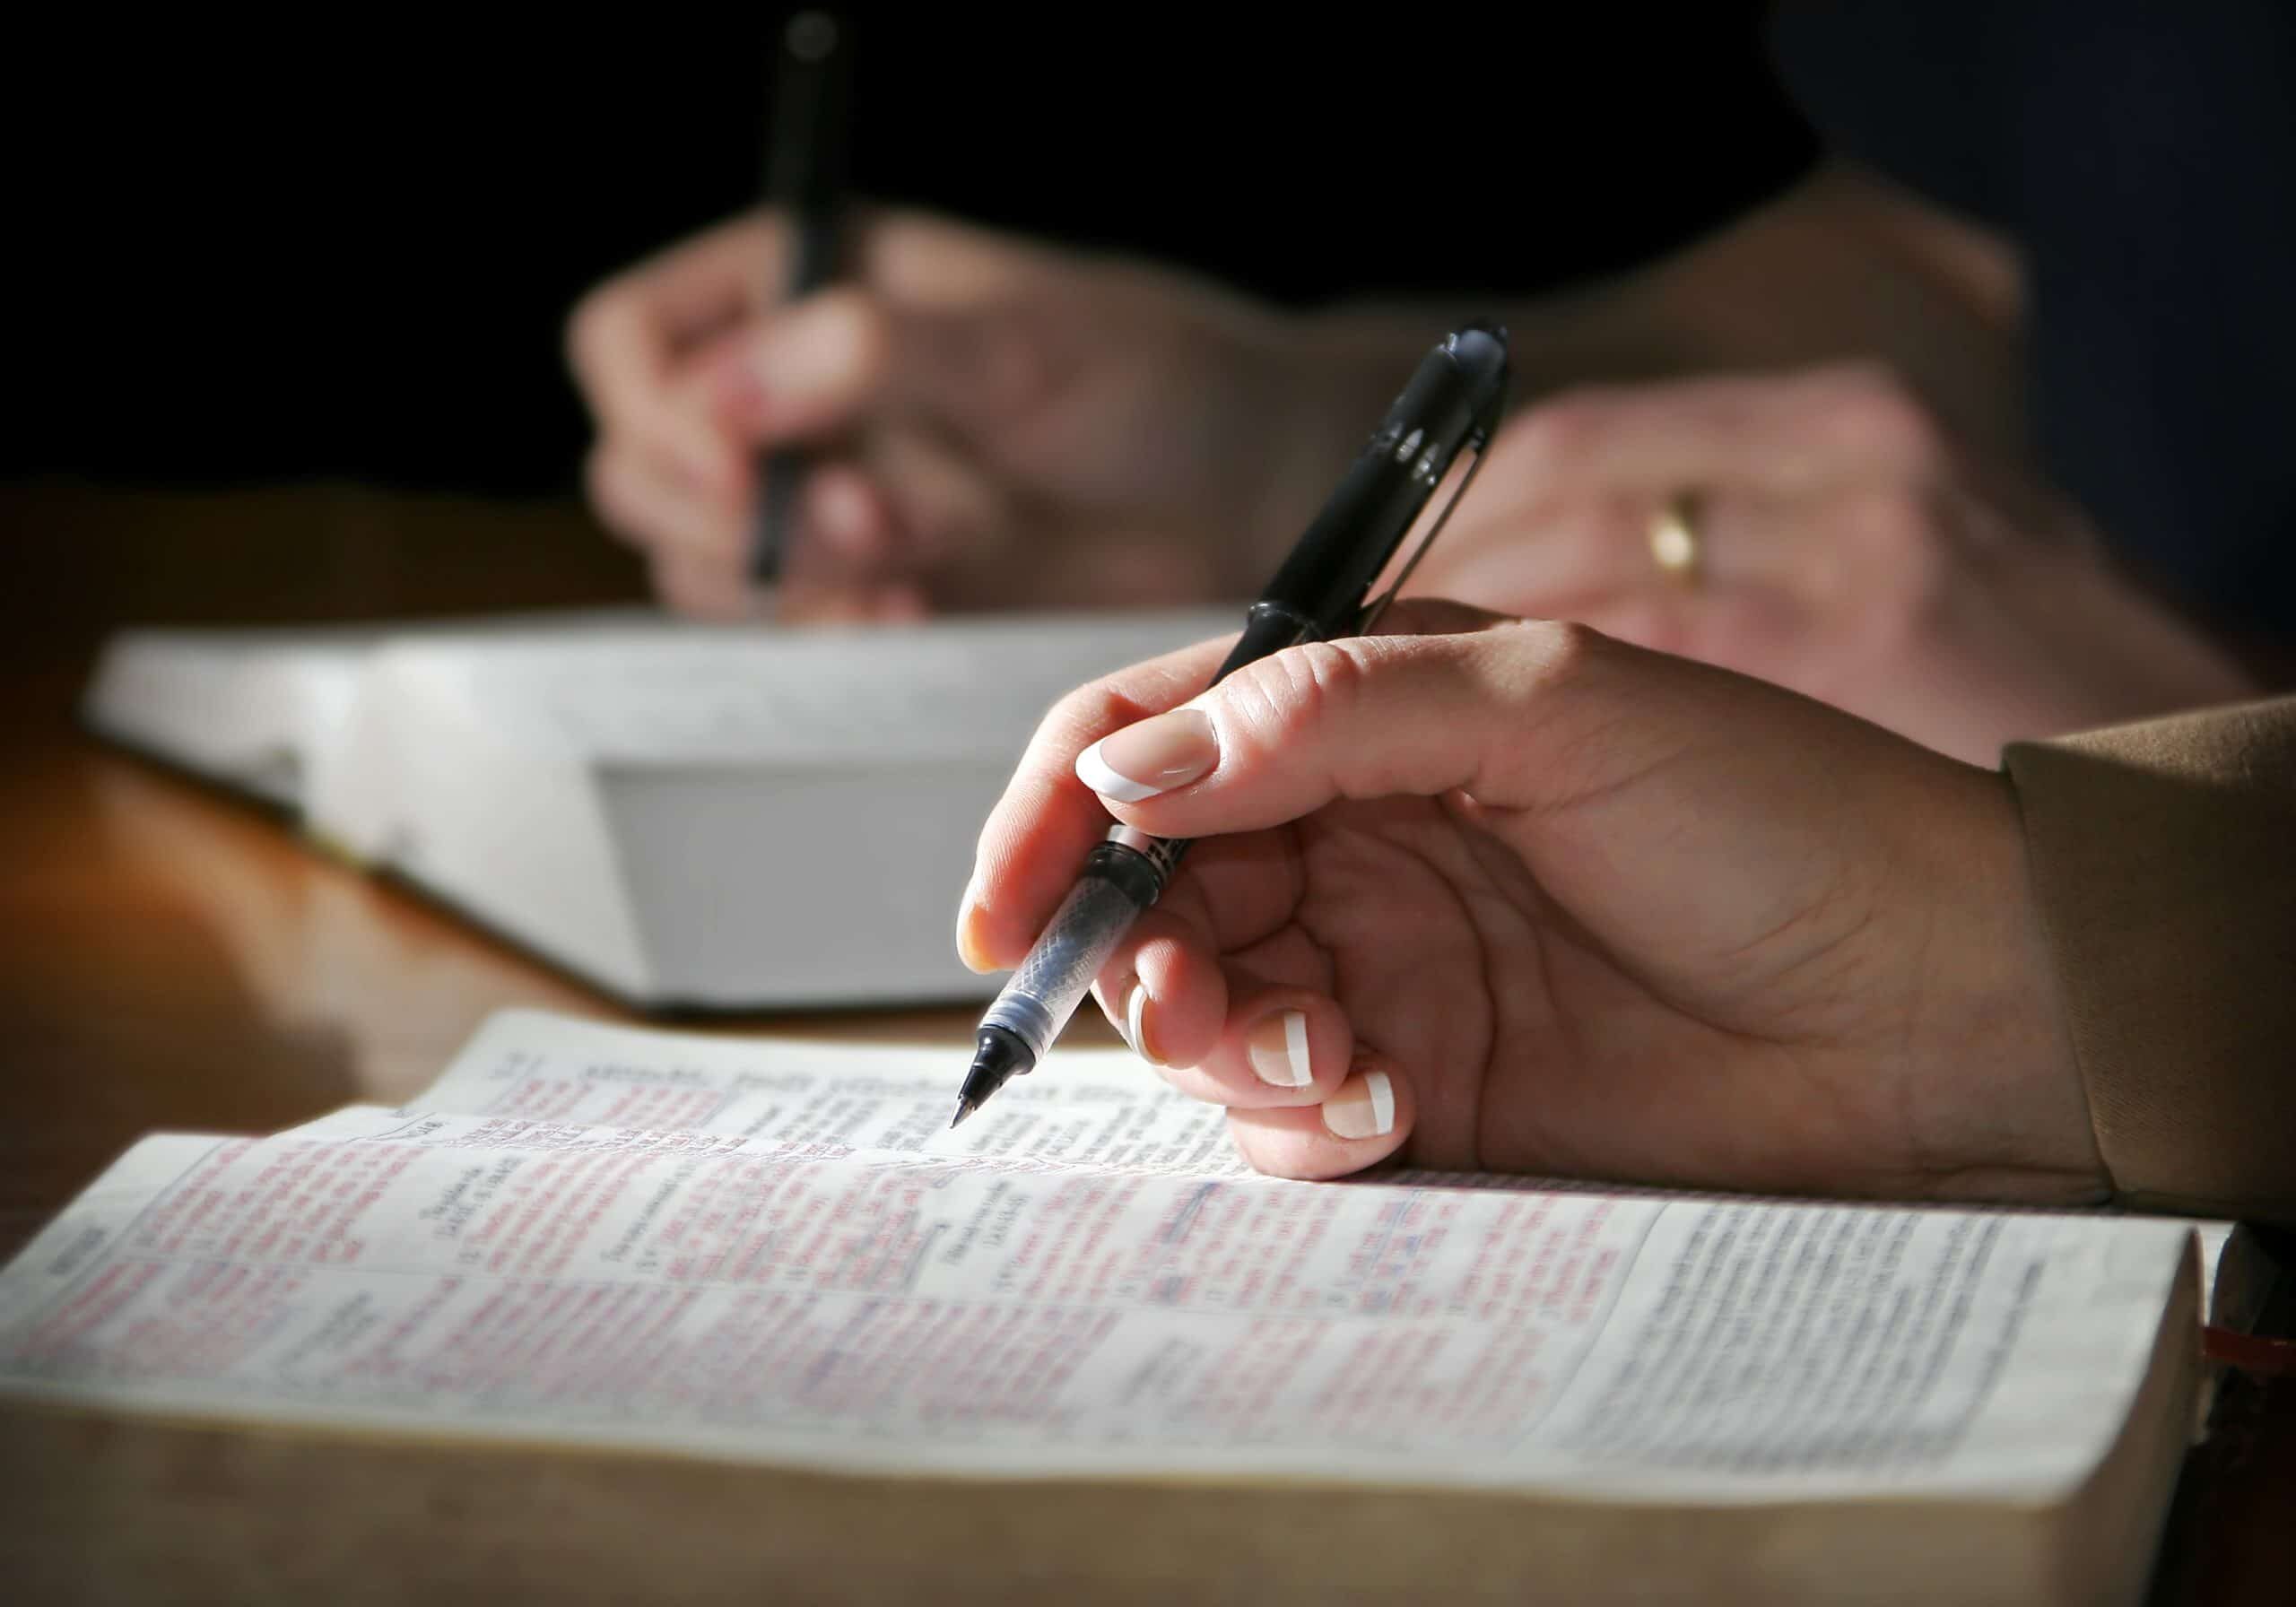 The hands of a couple are highlighted as they study the Holy Bible together - focus point on the woman's foreground hand.